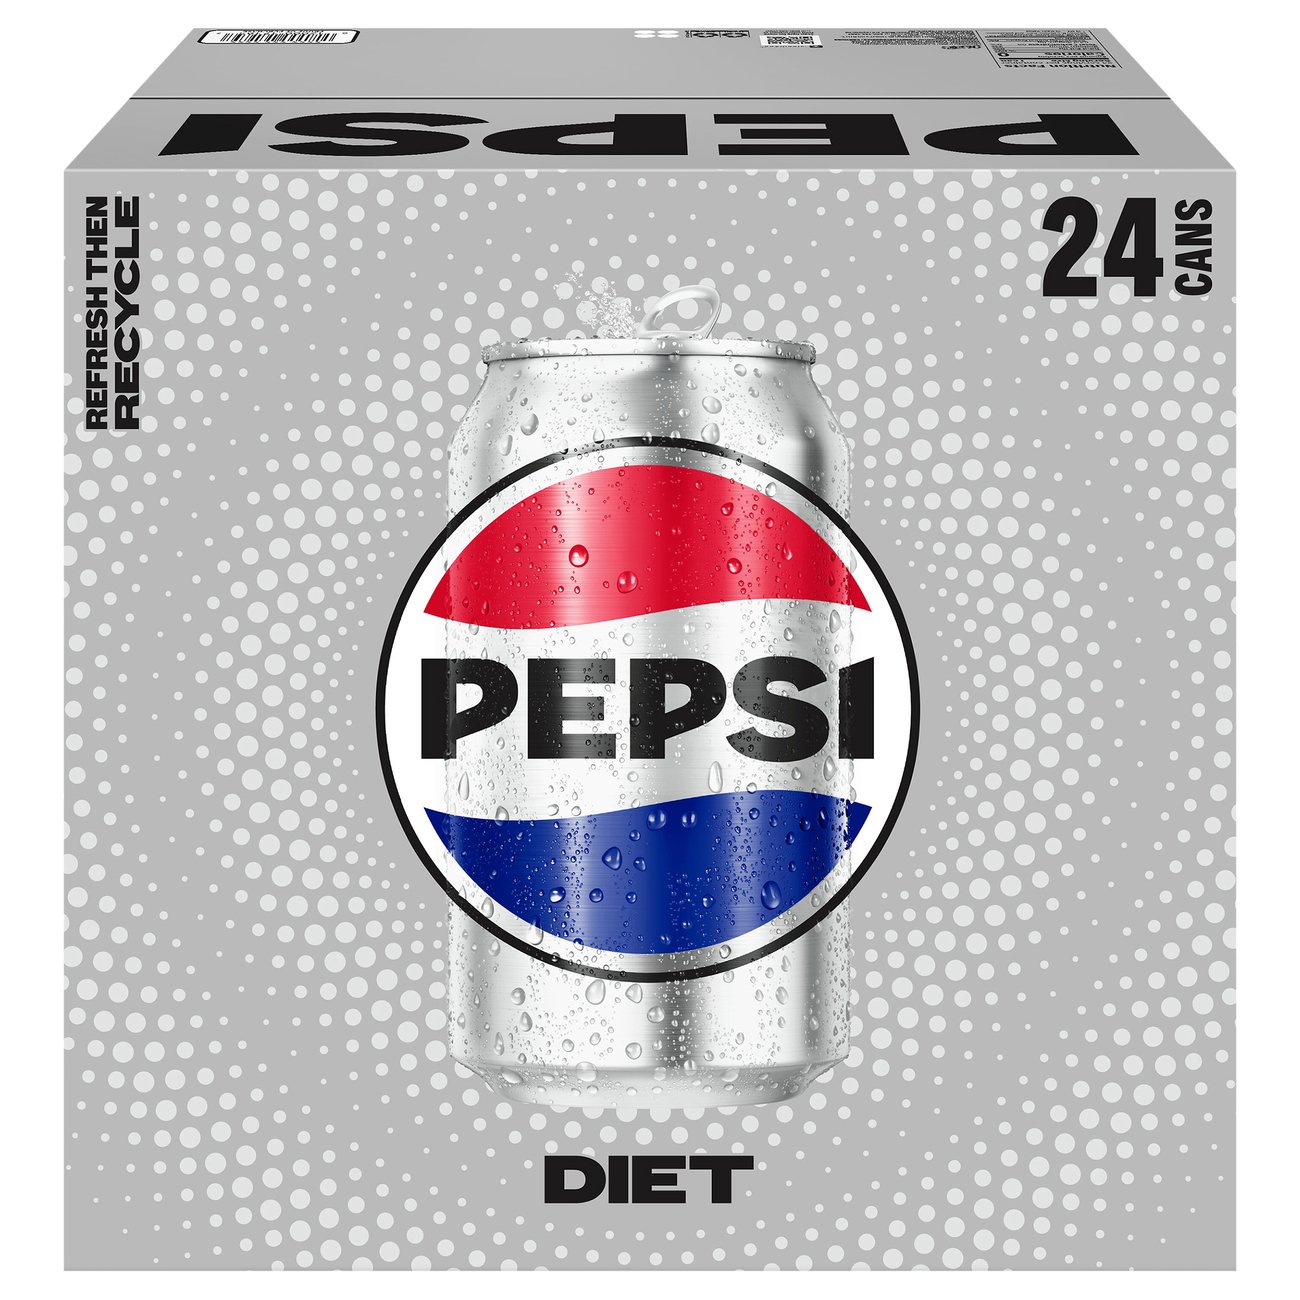 Pepsi Diet Cola 24 pk Cans Shop Soda at HEB